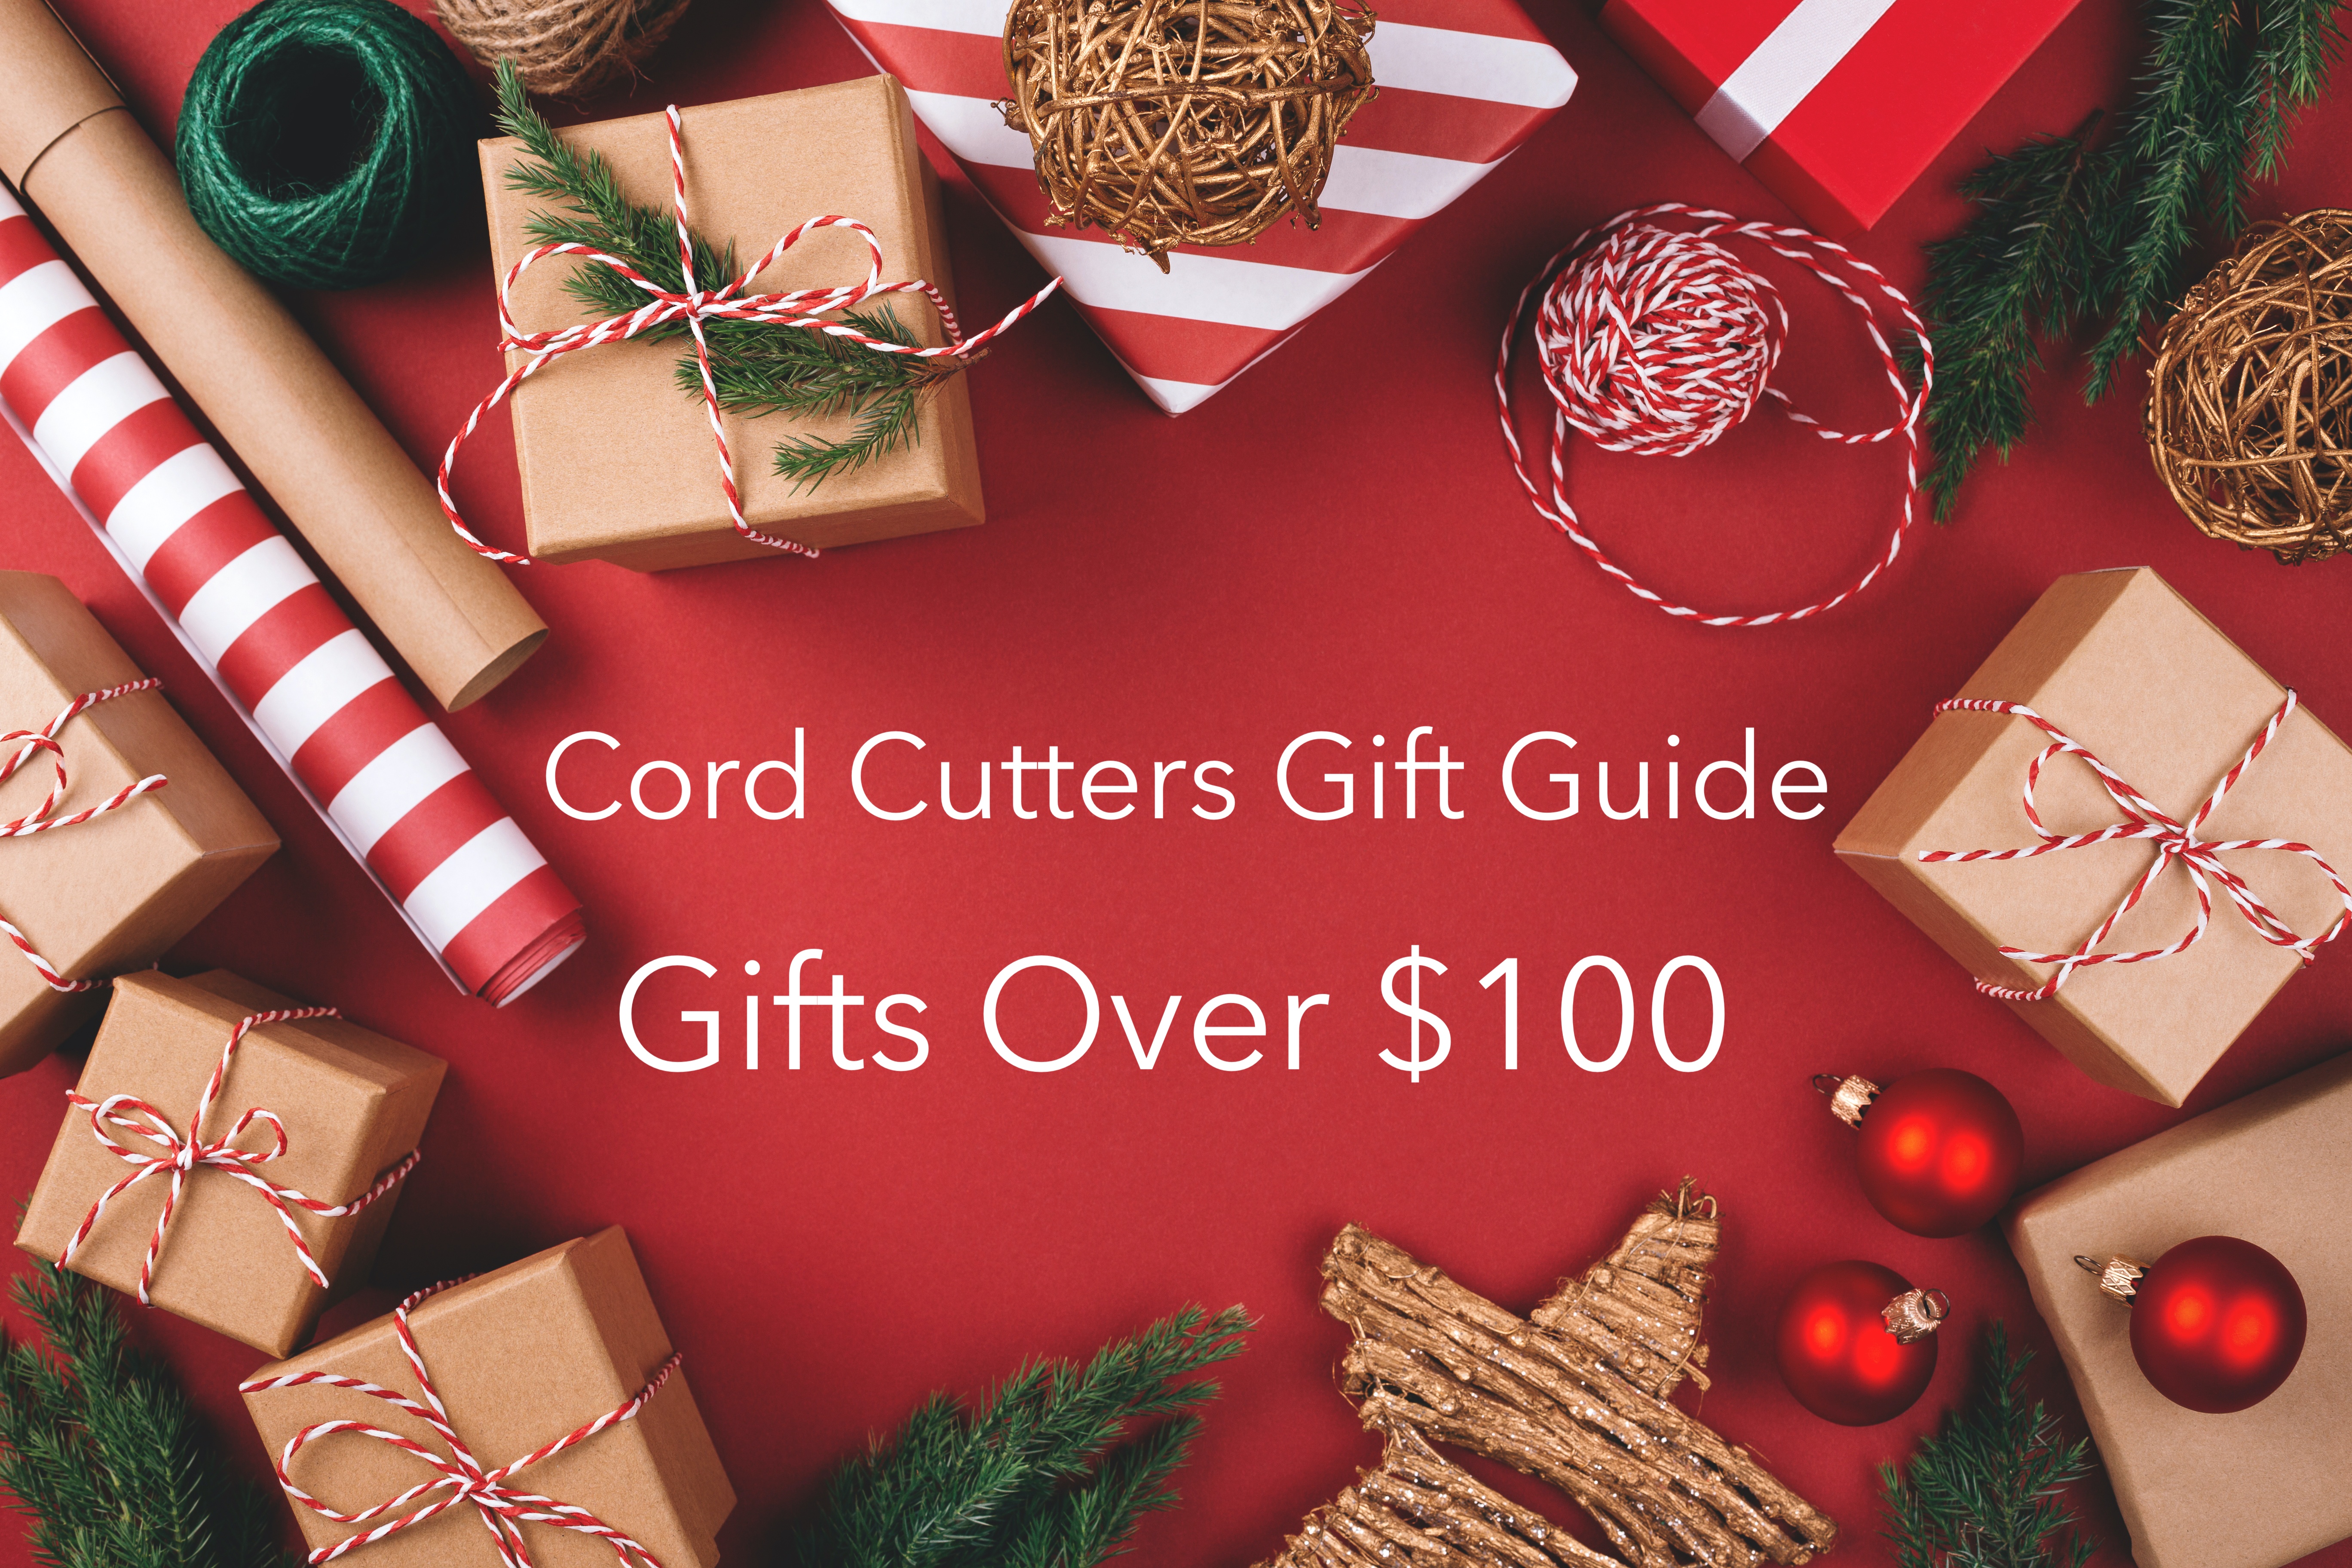 Best Gifts Over $100 for Cord Cutters 2020